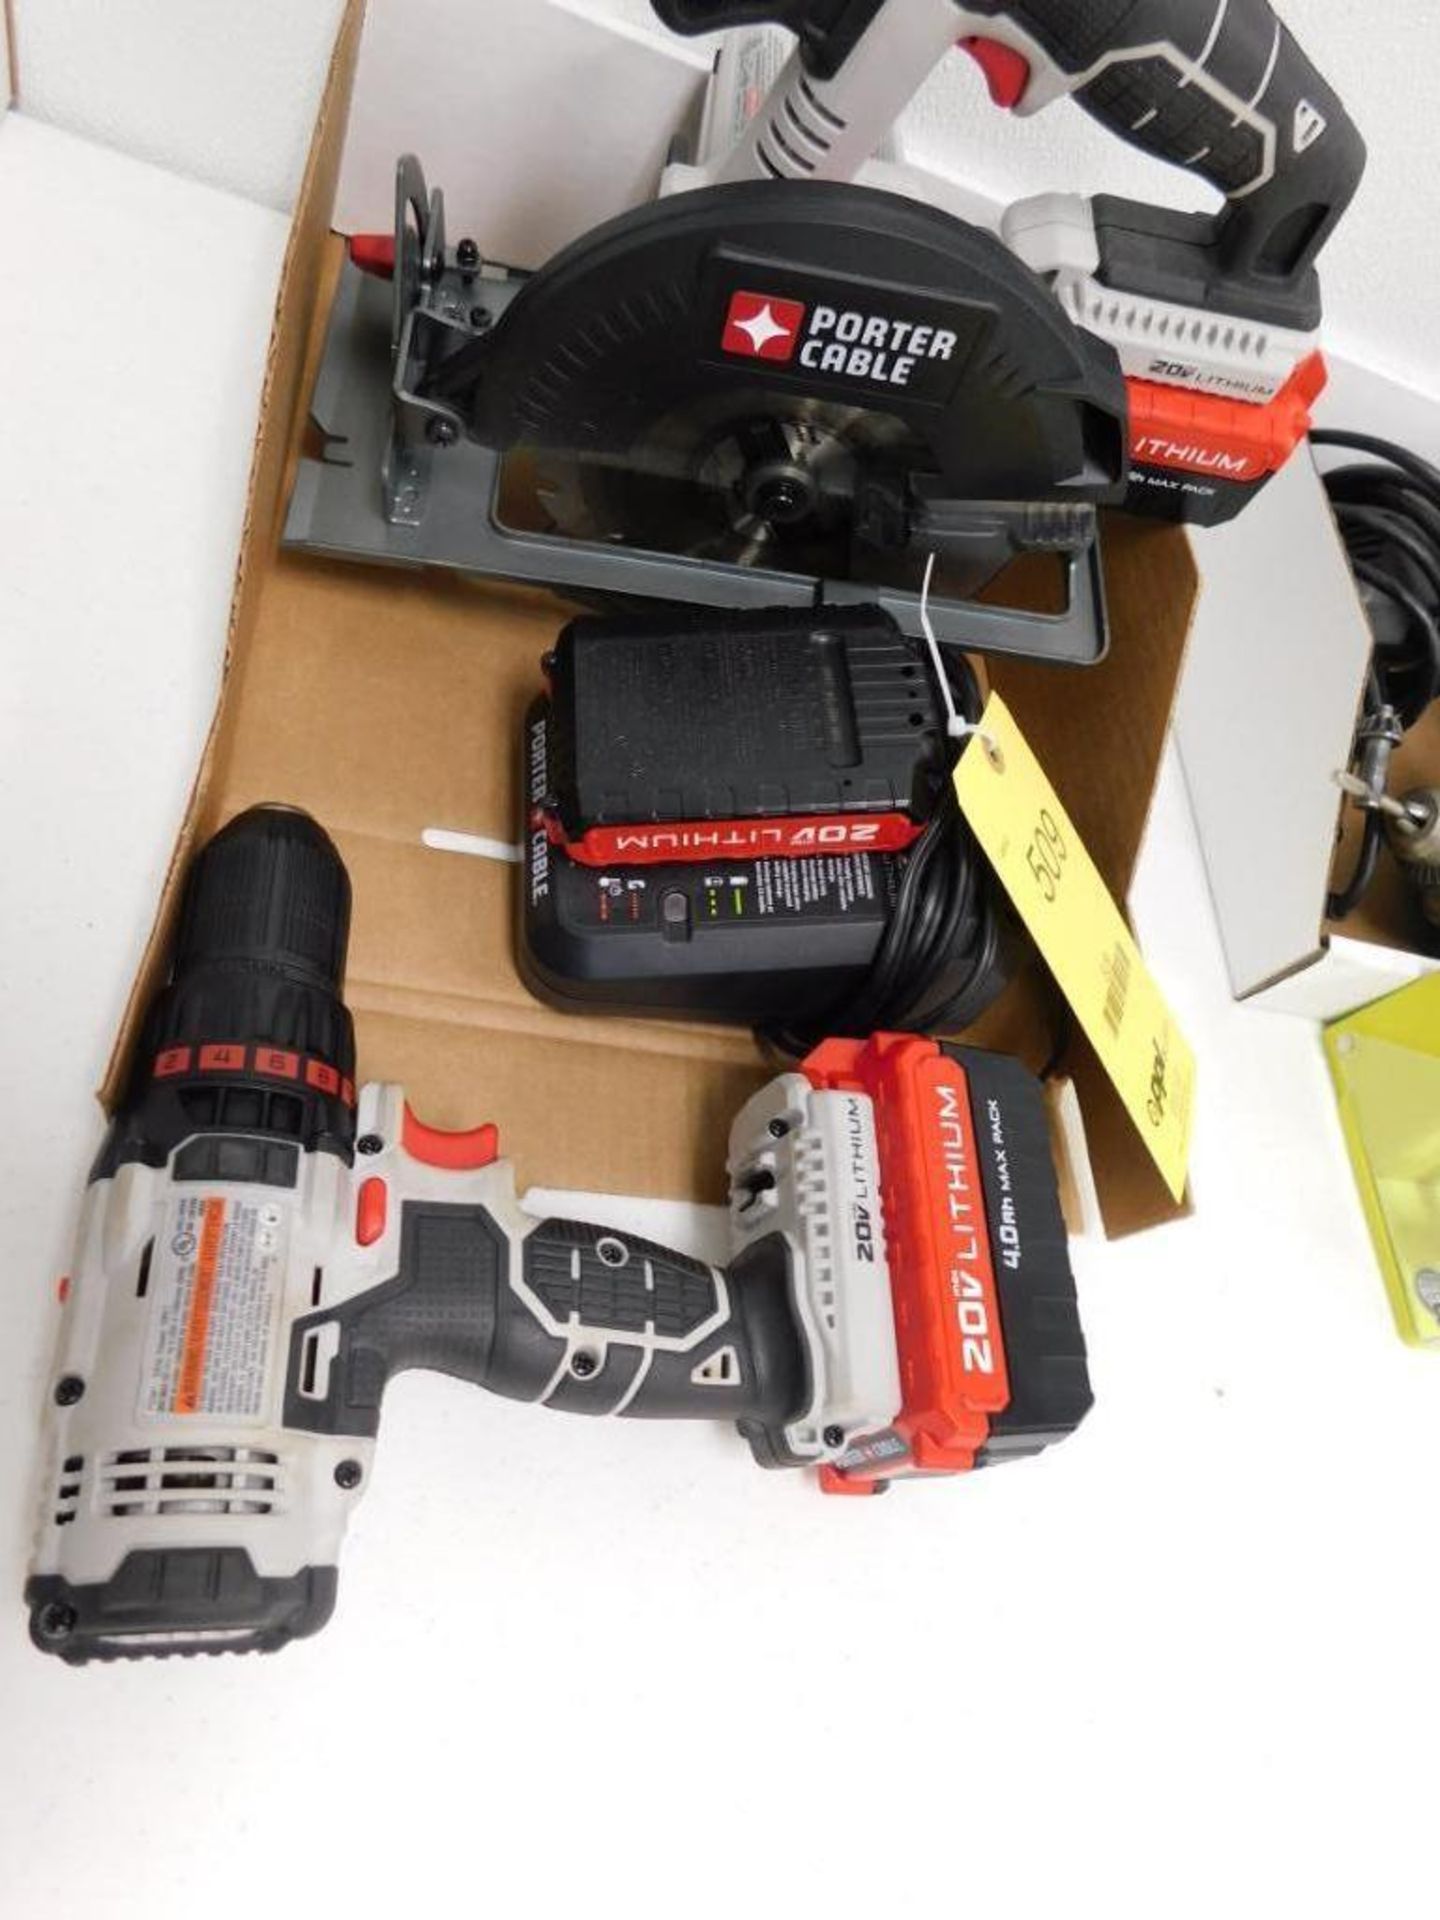 LOT: Porter Cable 20 Volt Lithion Cordless Drill & Circular Saw, with Batteries & Charger